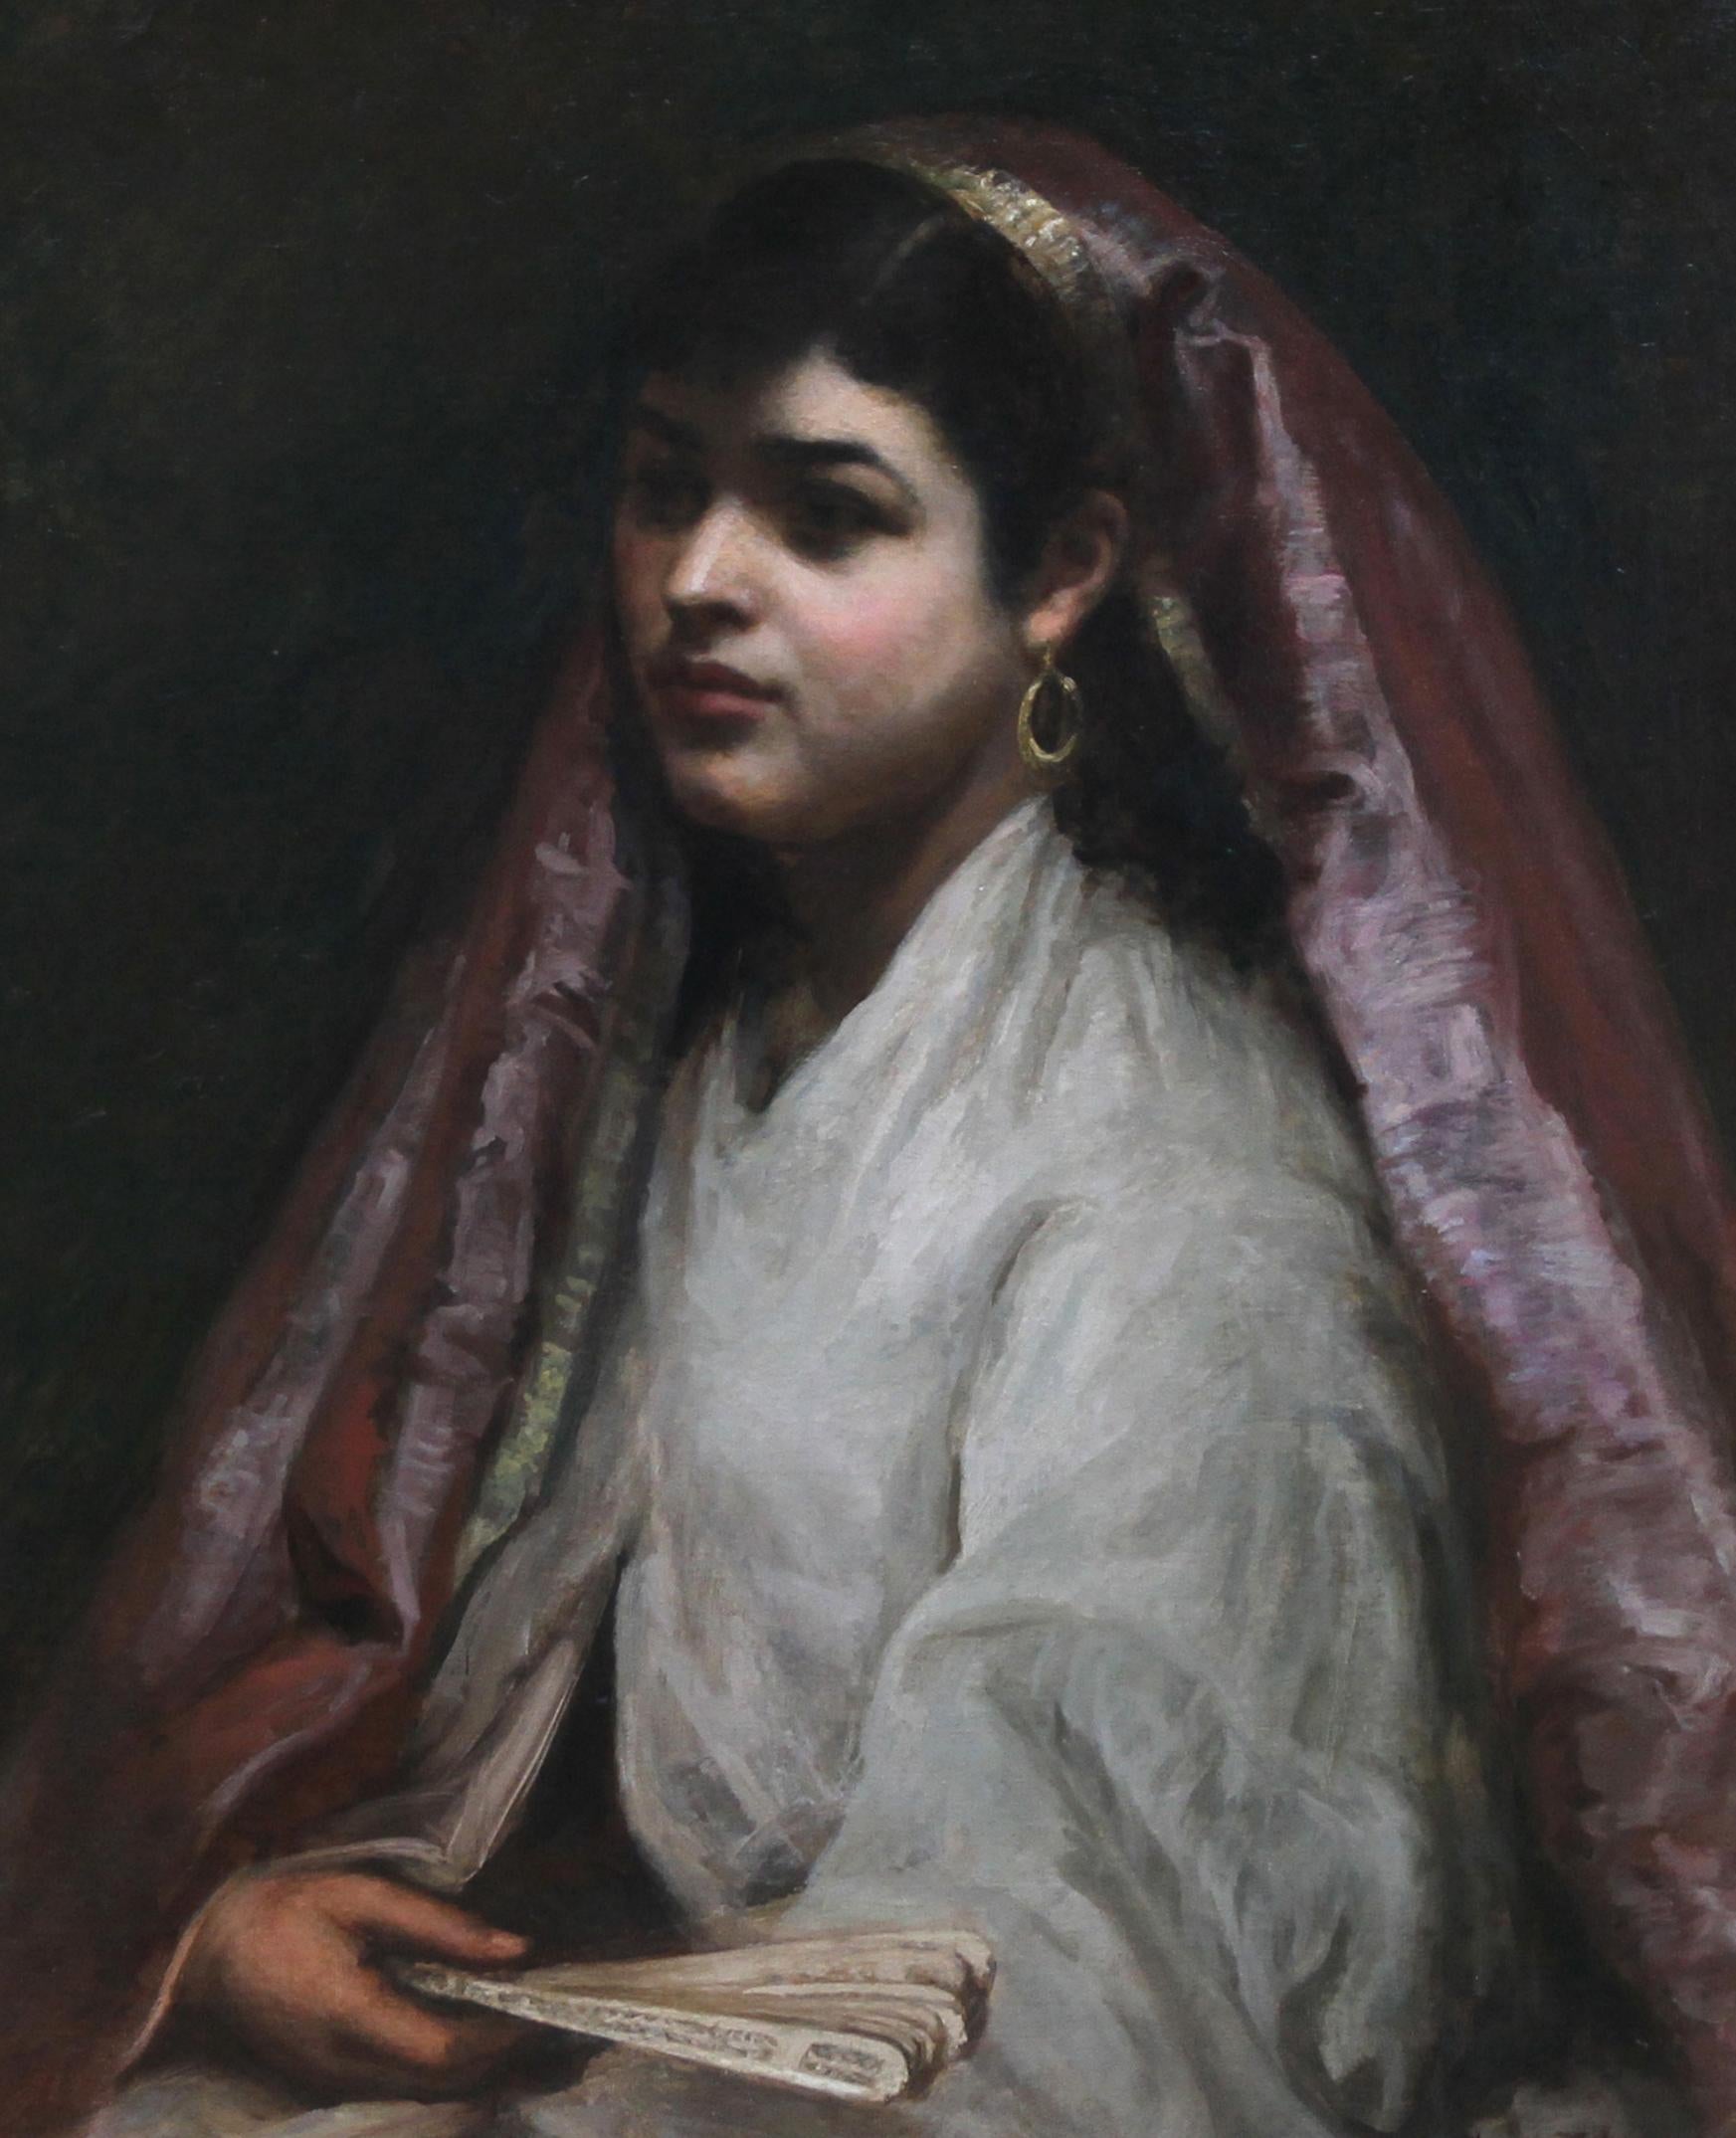 A stunning 19th century oil painting by noted British Jewish artist Joseph Mordecai which depicts an Arabian beauty and was painted in 1873. The painting was exhibited at The Royal Academy in 1873 under the title The Nubian and it is a fine